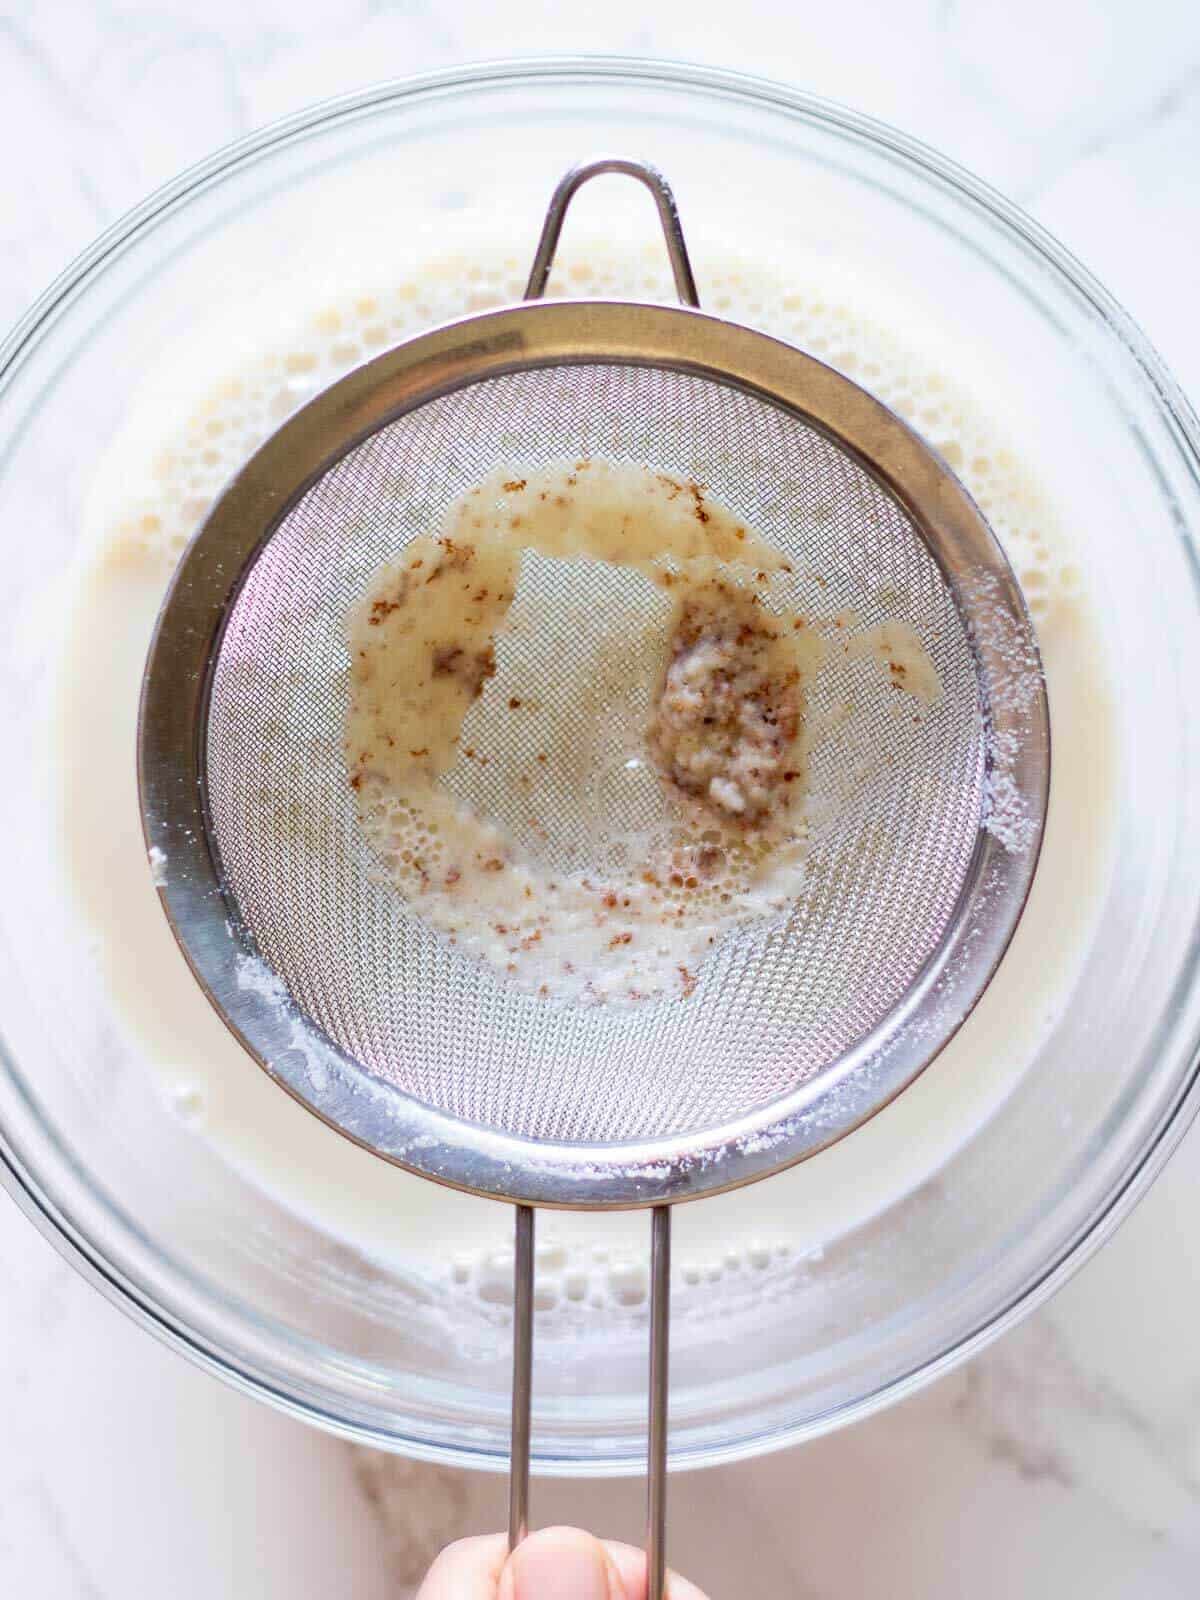 straining cooked soy milk with a wire strainer.